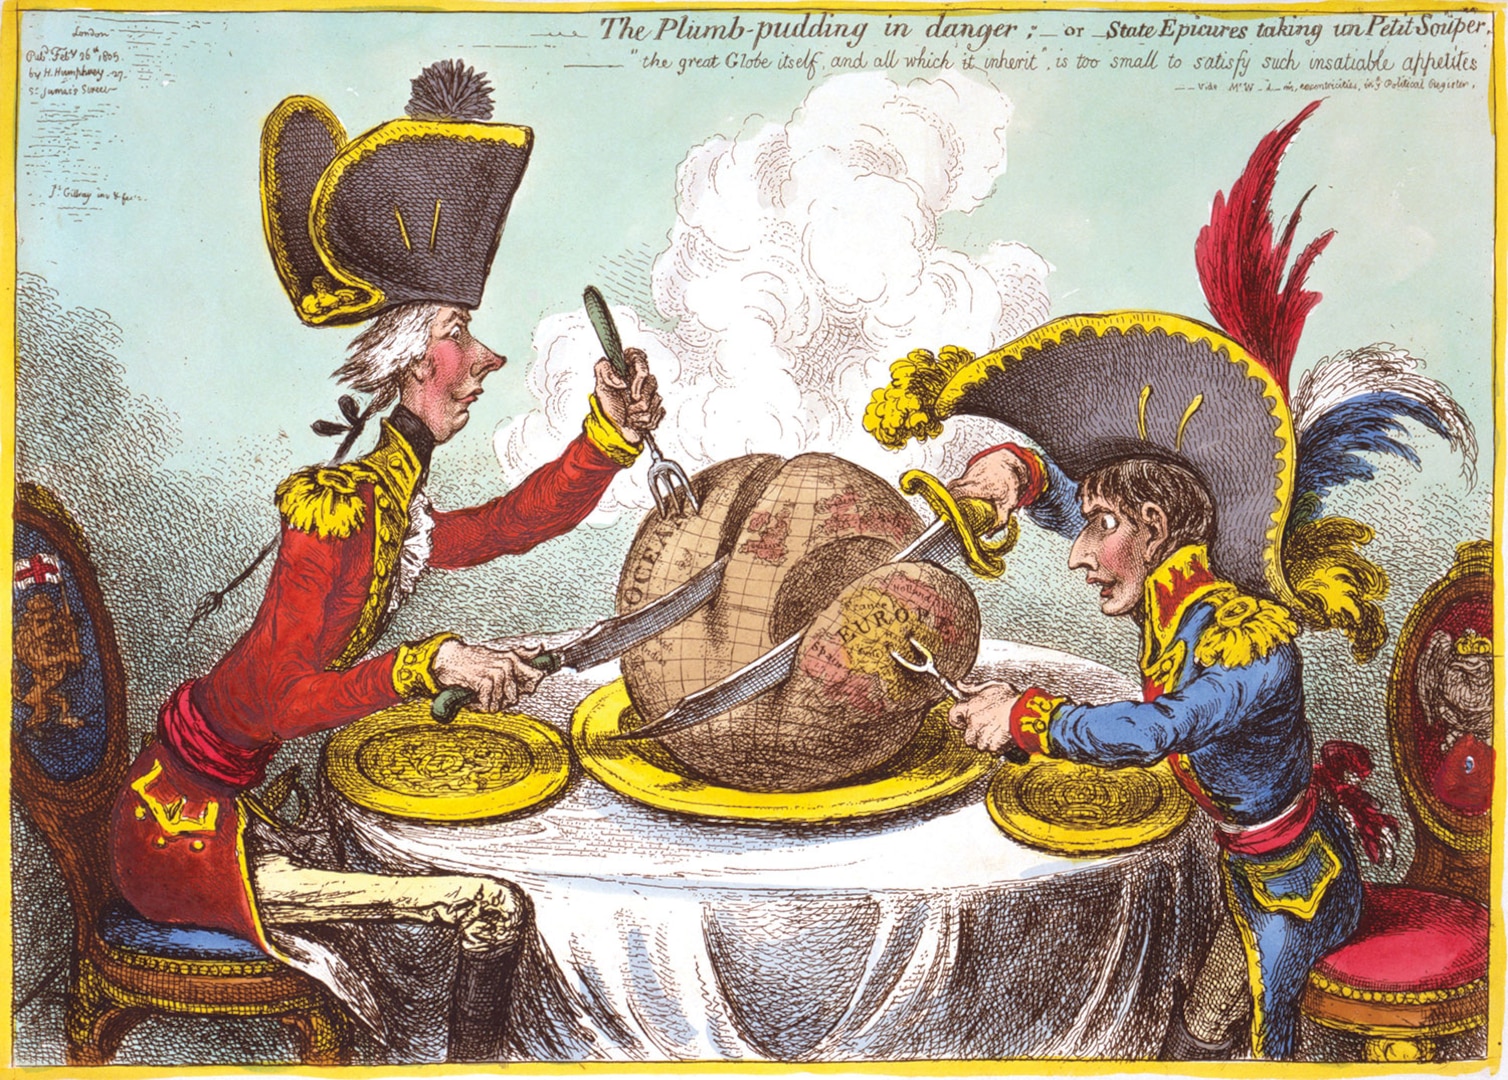 Figure 2.1. Britain (William Pitt) and Napoleon Carving Up the World. Source: James Gillray, The Plumb-Pudding [sic] in Danger (London: H. Humphrey, 1805).